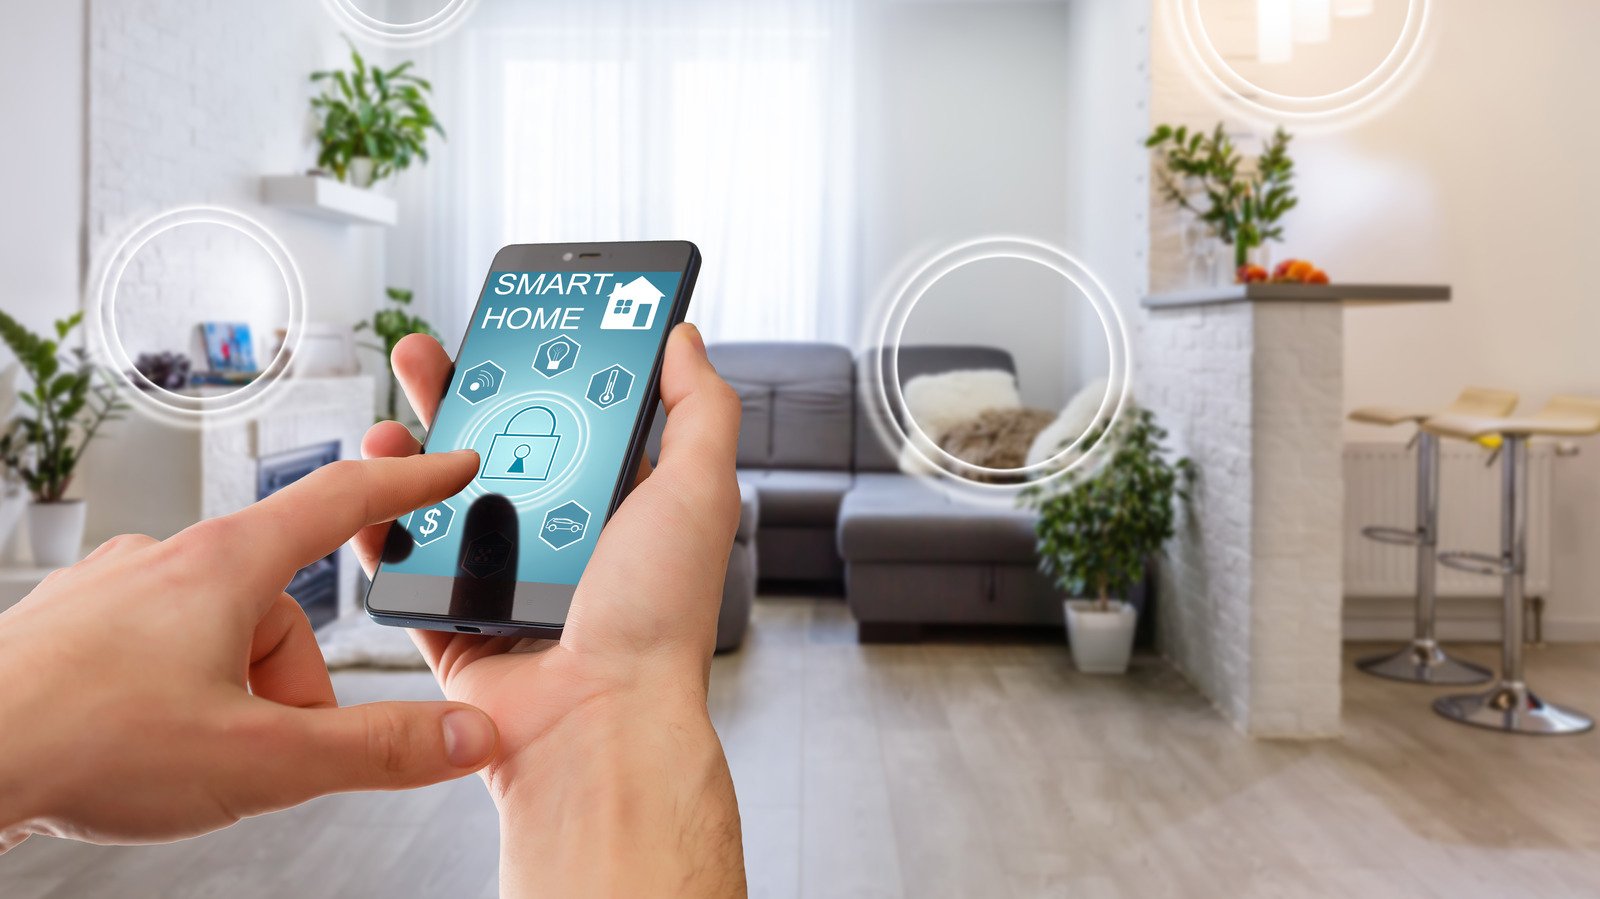 5 Inexpensive Smart Home Devices To Help Make Life Easier